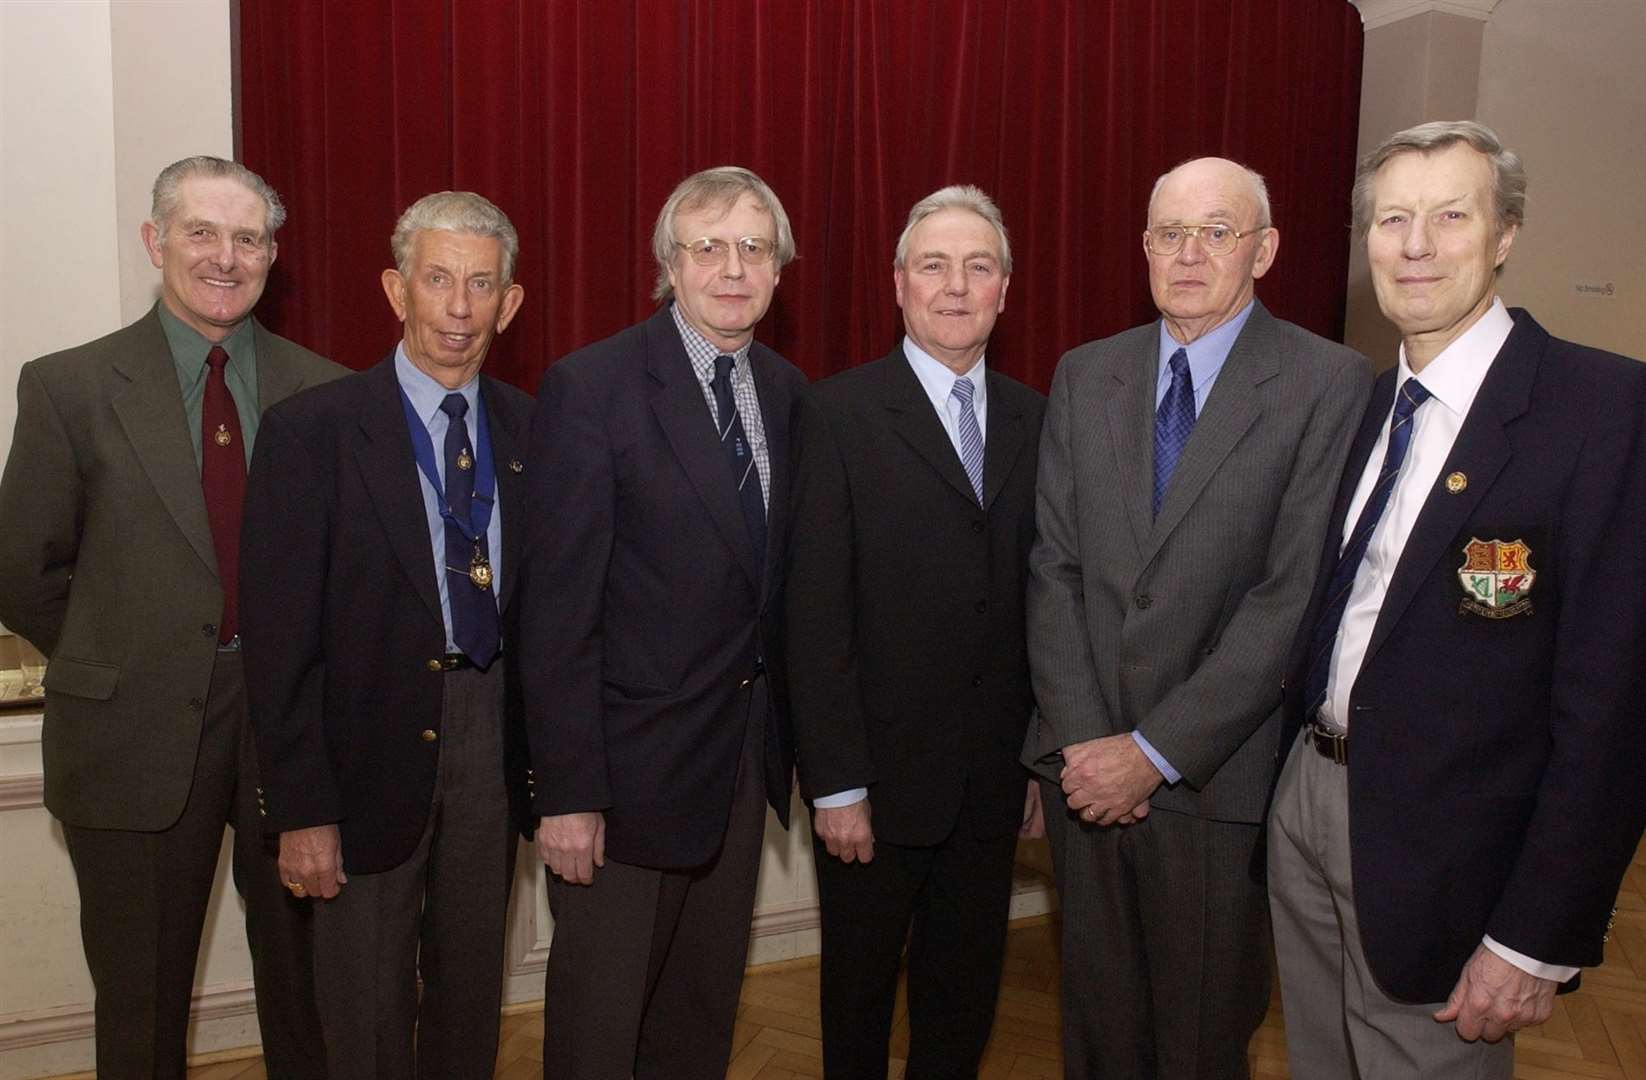 John Fenning (second from left) pictured at the East Kent Referees' Association Dinner at Littlebourne Village Hall in 2015